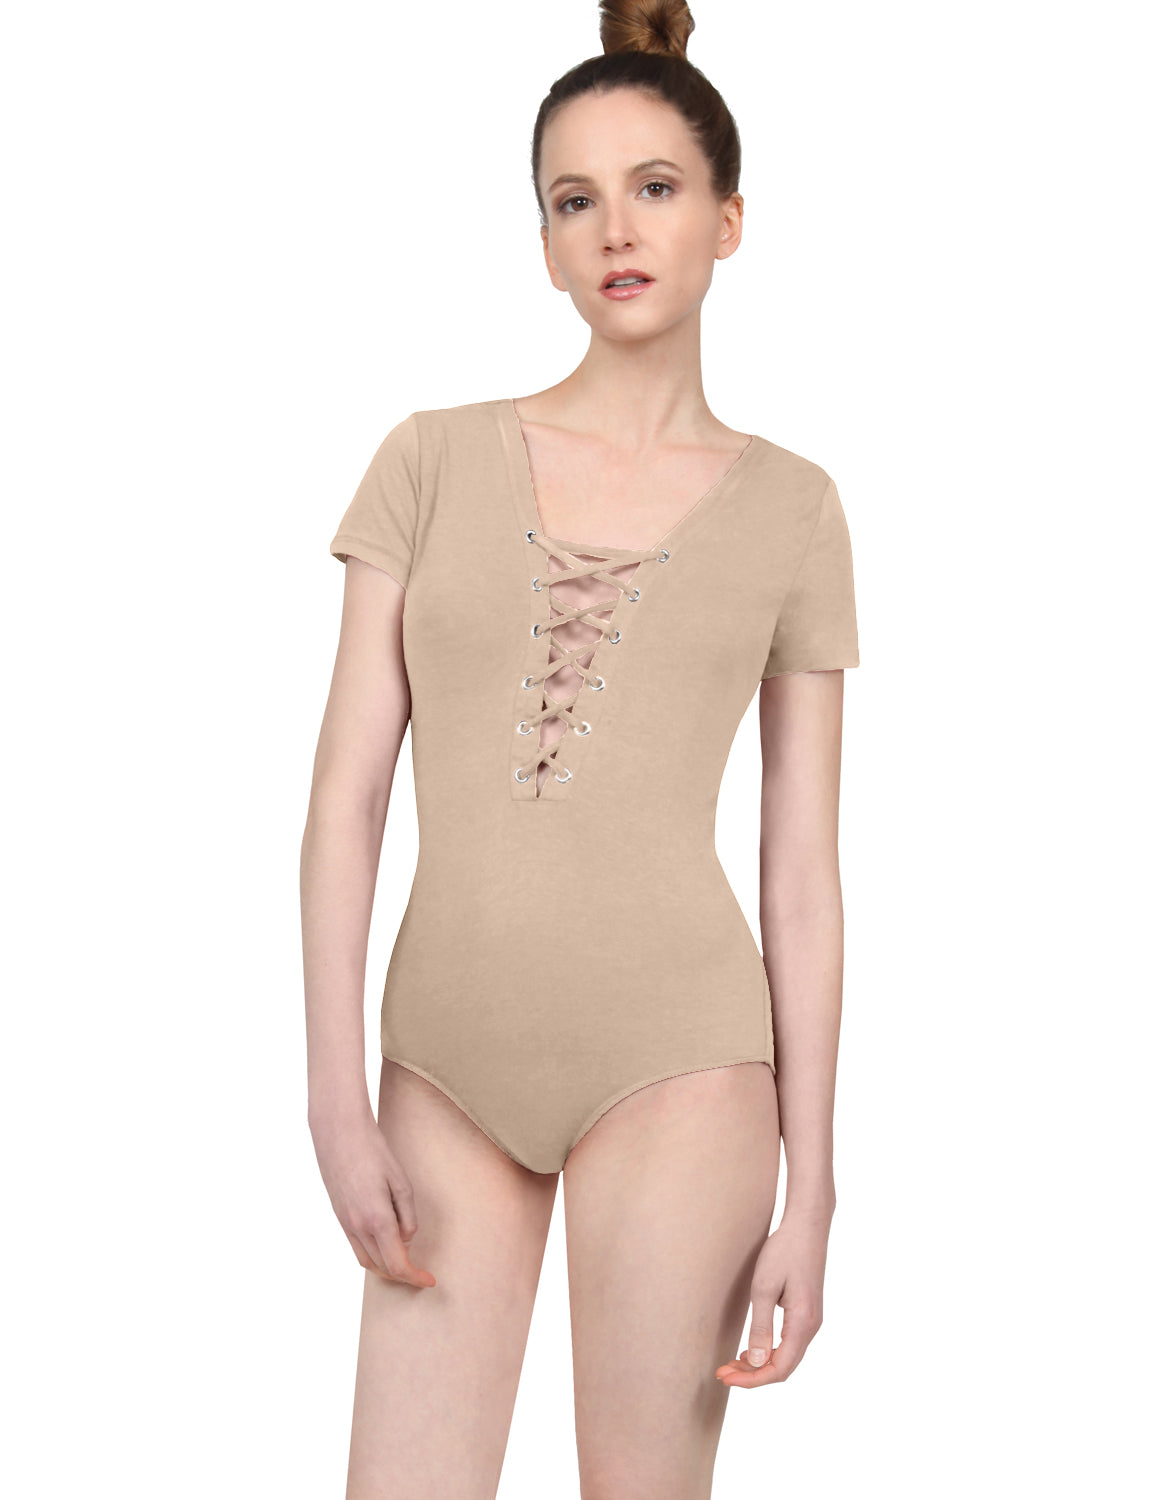 Womens Lace Leotards Body Suits With Short Sleeves